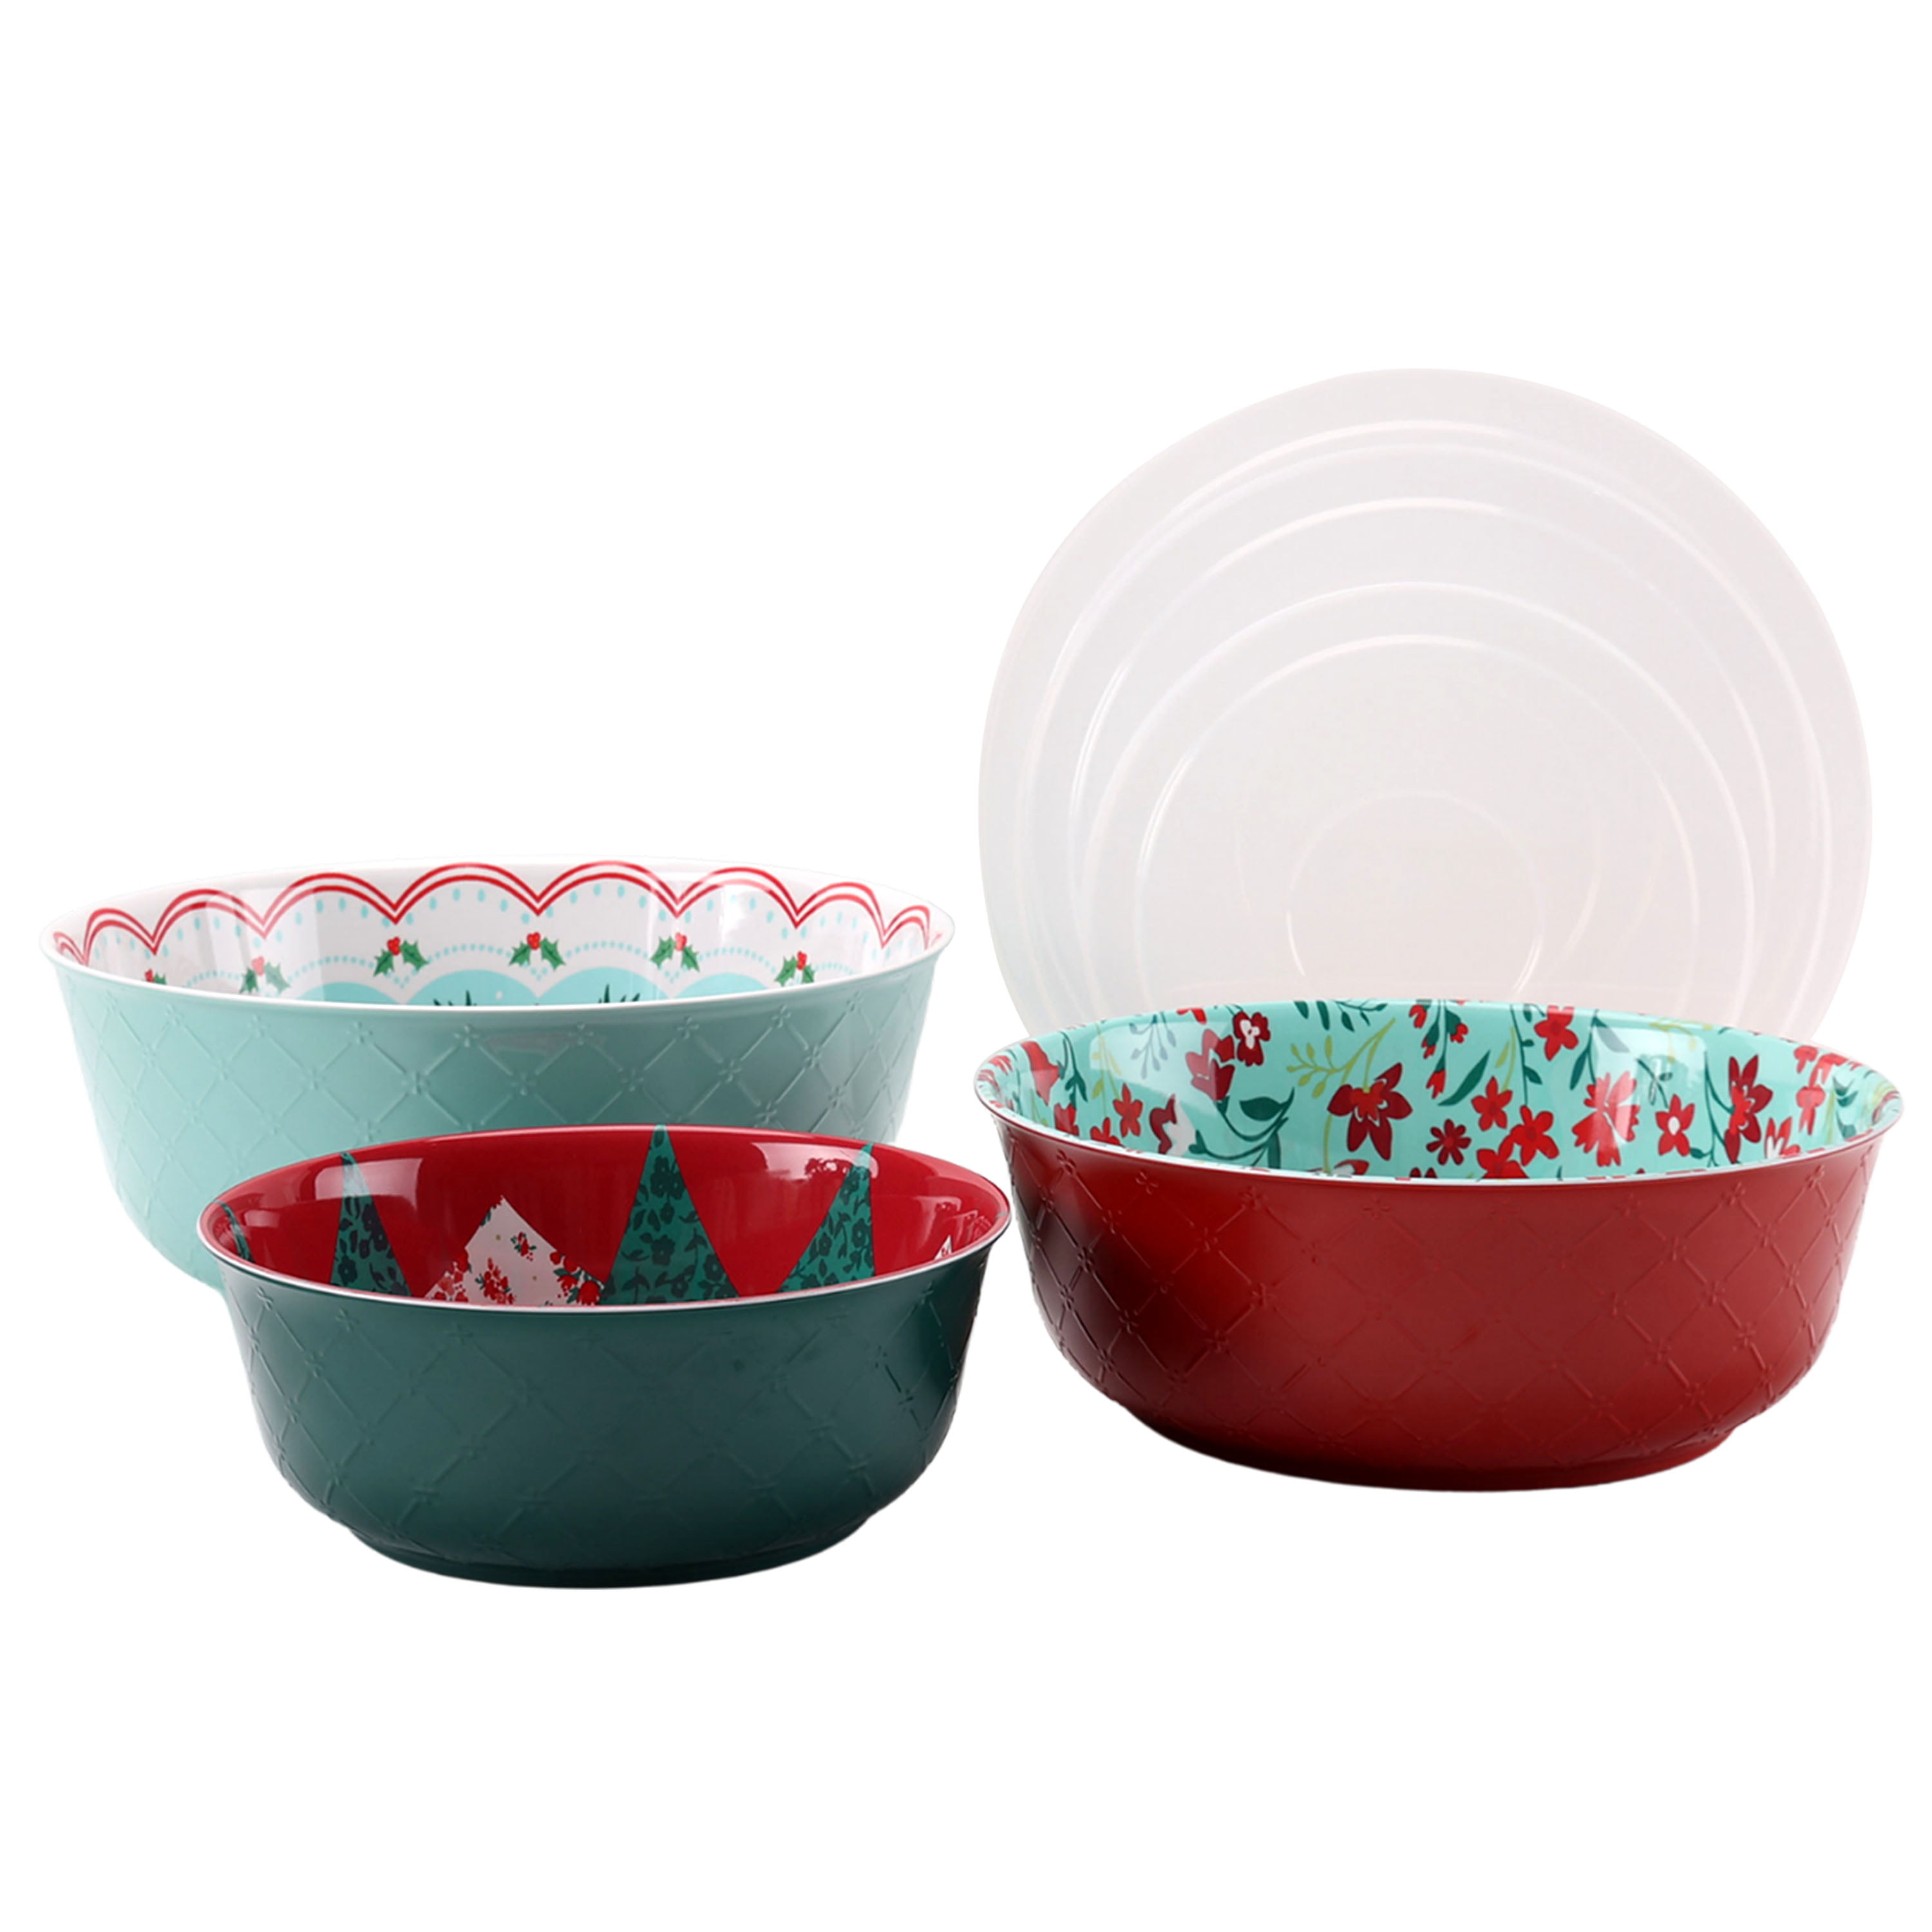 The Pioneer Woman Melamine Mixing Bowl Set with Lids, 18 Piece Set, Wishful Winter, Size: XL Bowl: Dia 10 5/8 inch x 6 H inch (with Lid)Large Bowl